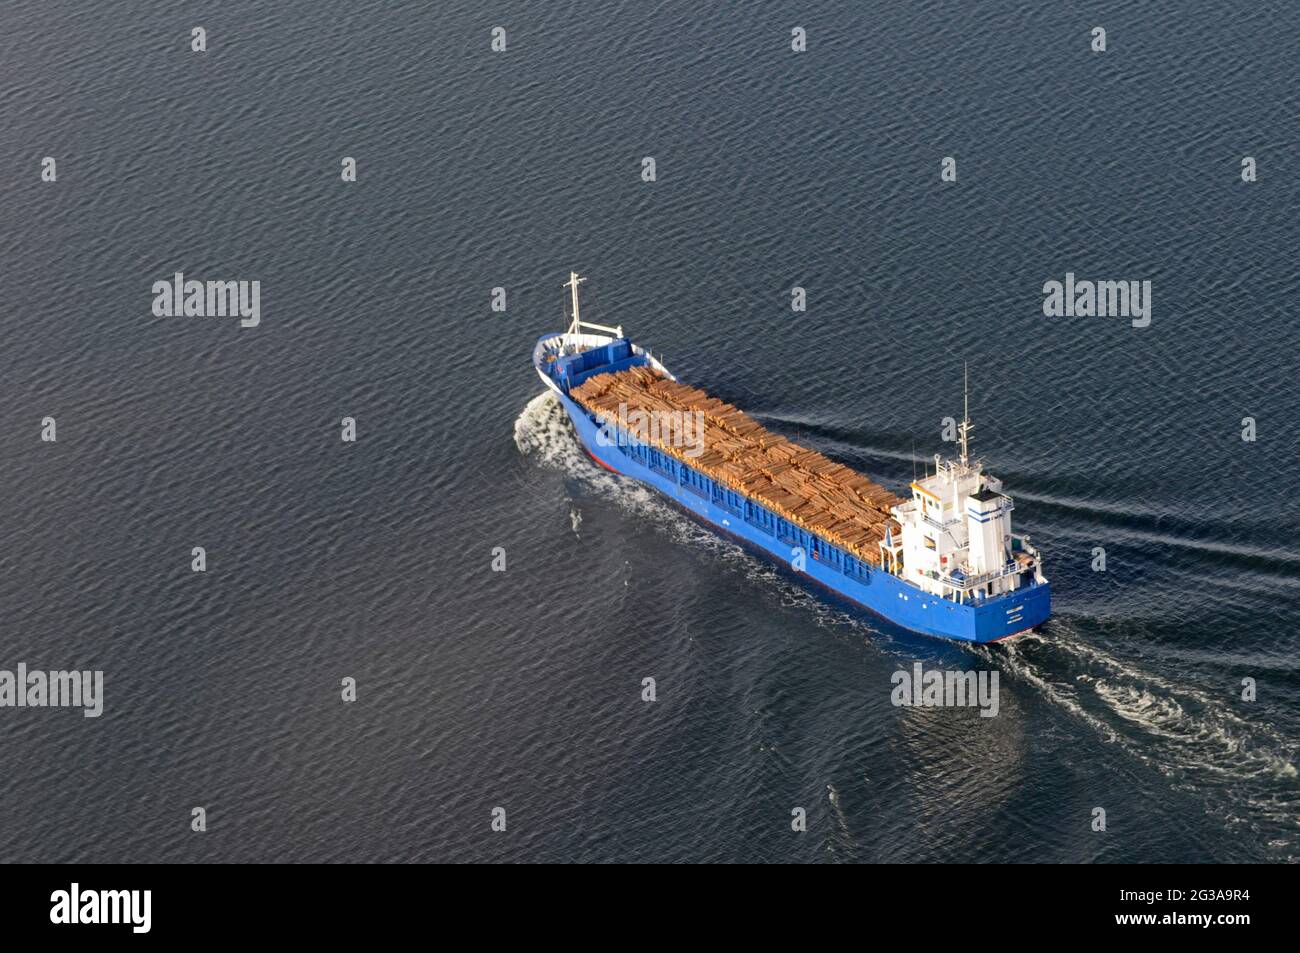 Freigh ship pictured in Kalmarsund Sweden with a load of timber visible. Stock Photo